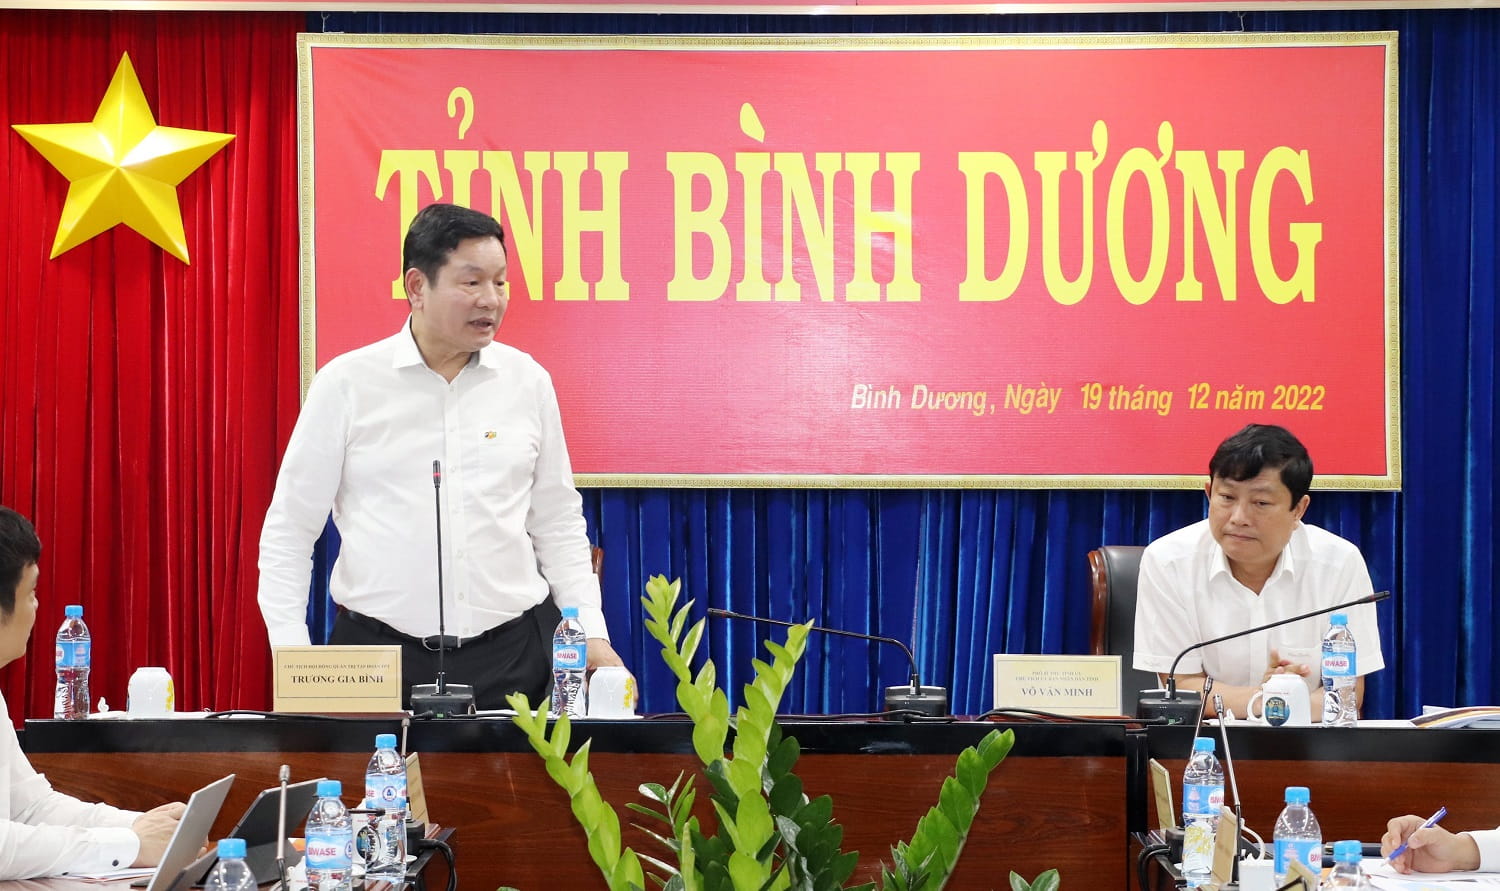 Mr. Truong Gia Binh - Chairman of FPT Corporation - shared his desire to become a companion of Binh Duong to promote digital transformation and high-quality workforce training. 